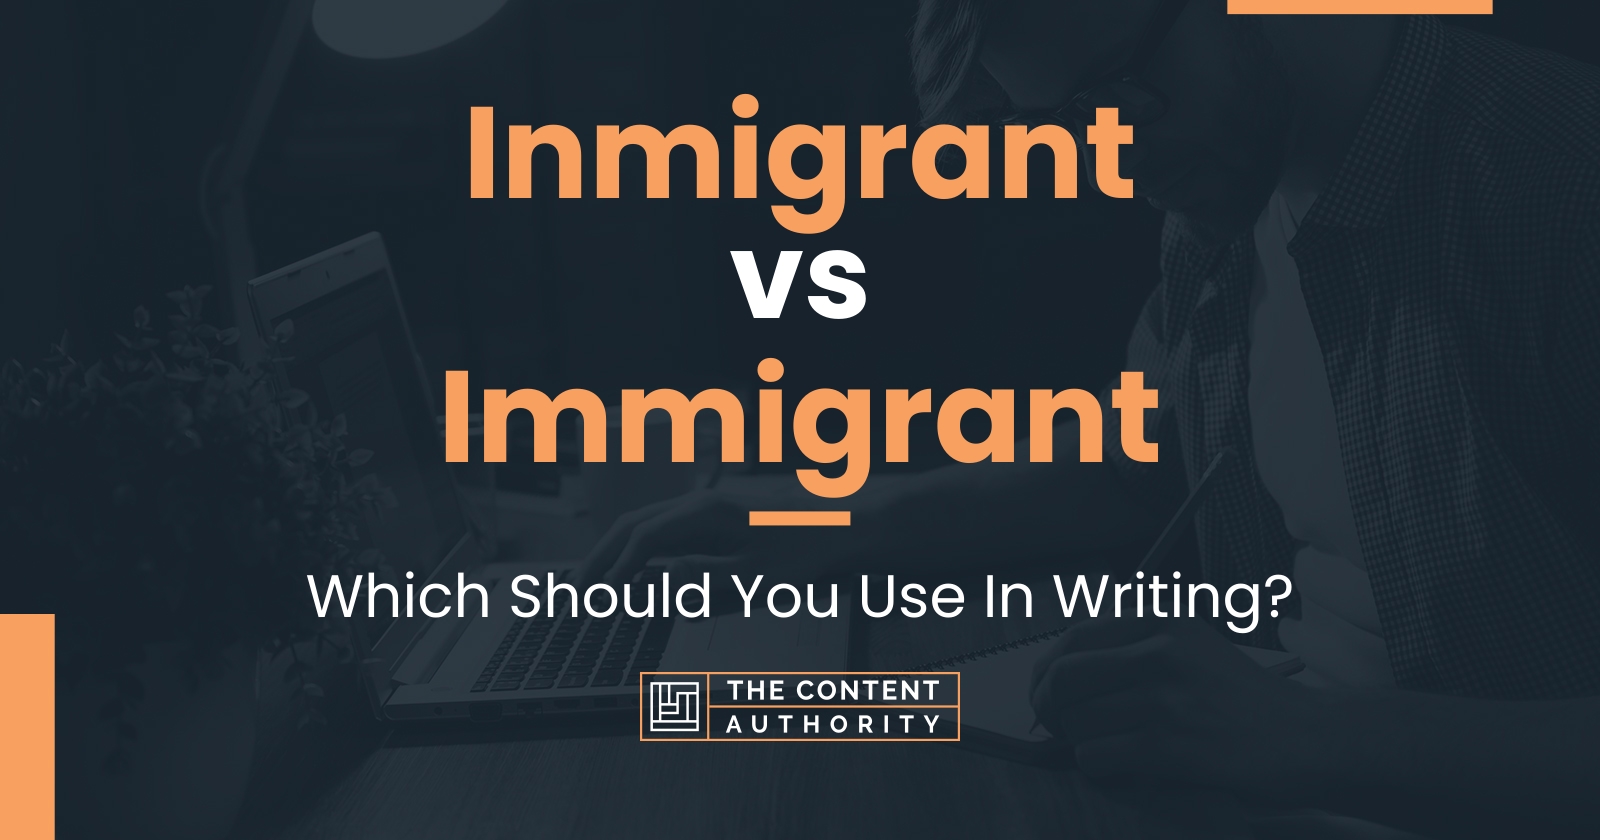 Inmigrant vs Immigrant: Which Should You Use In Writing?